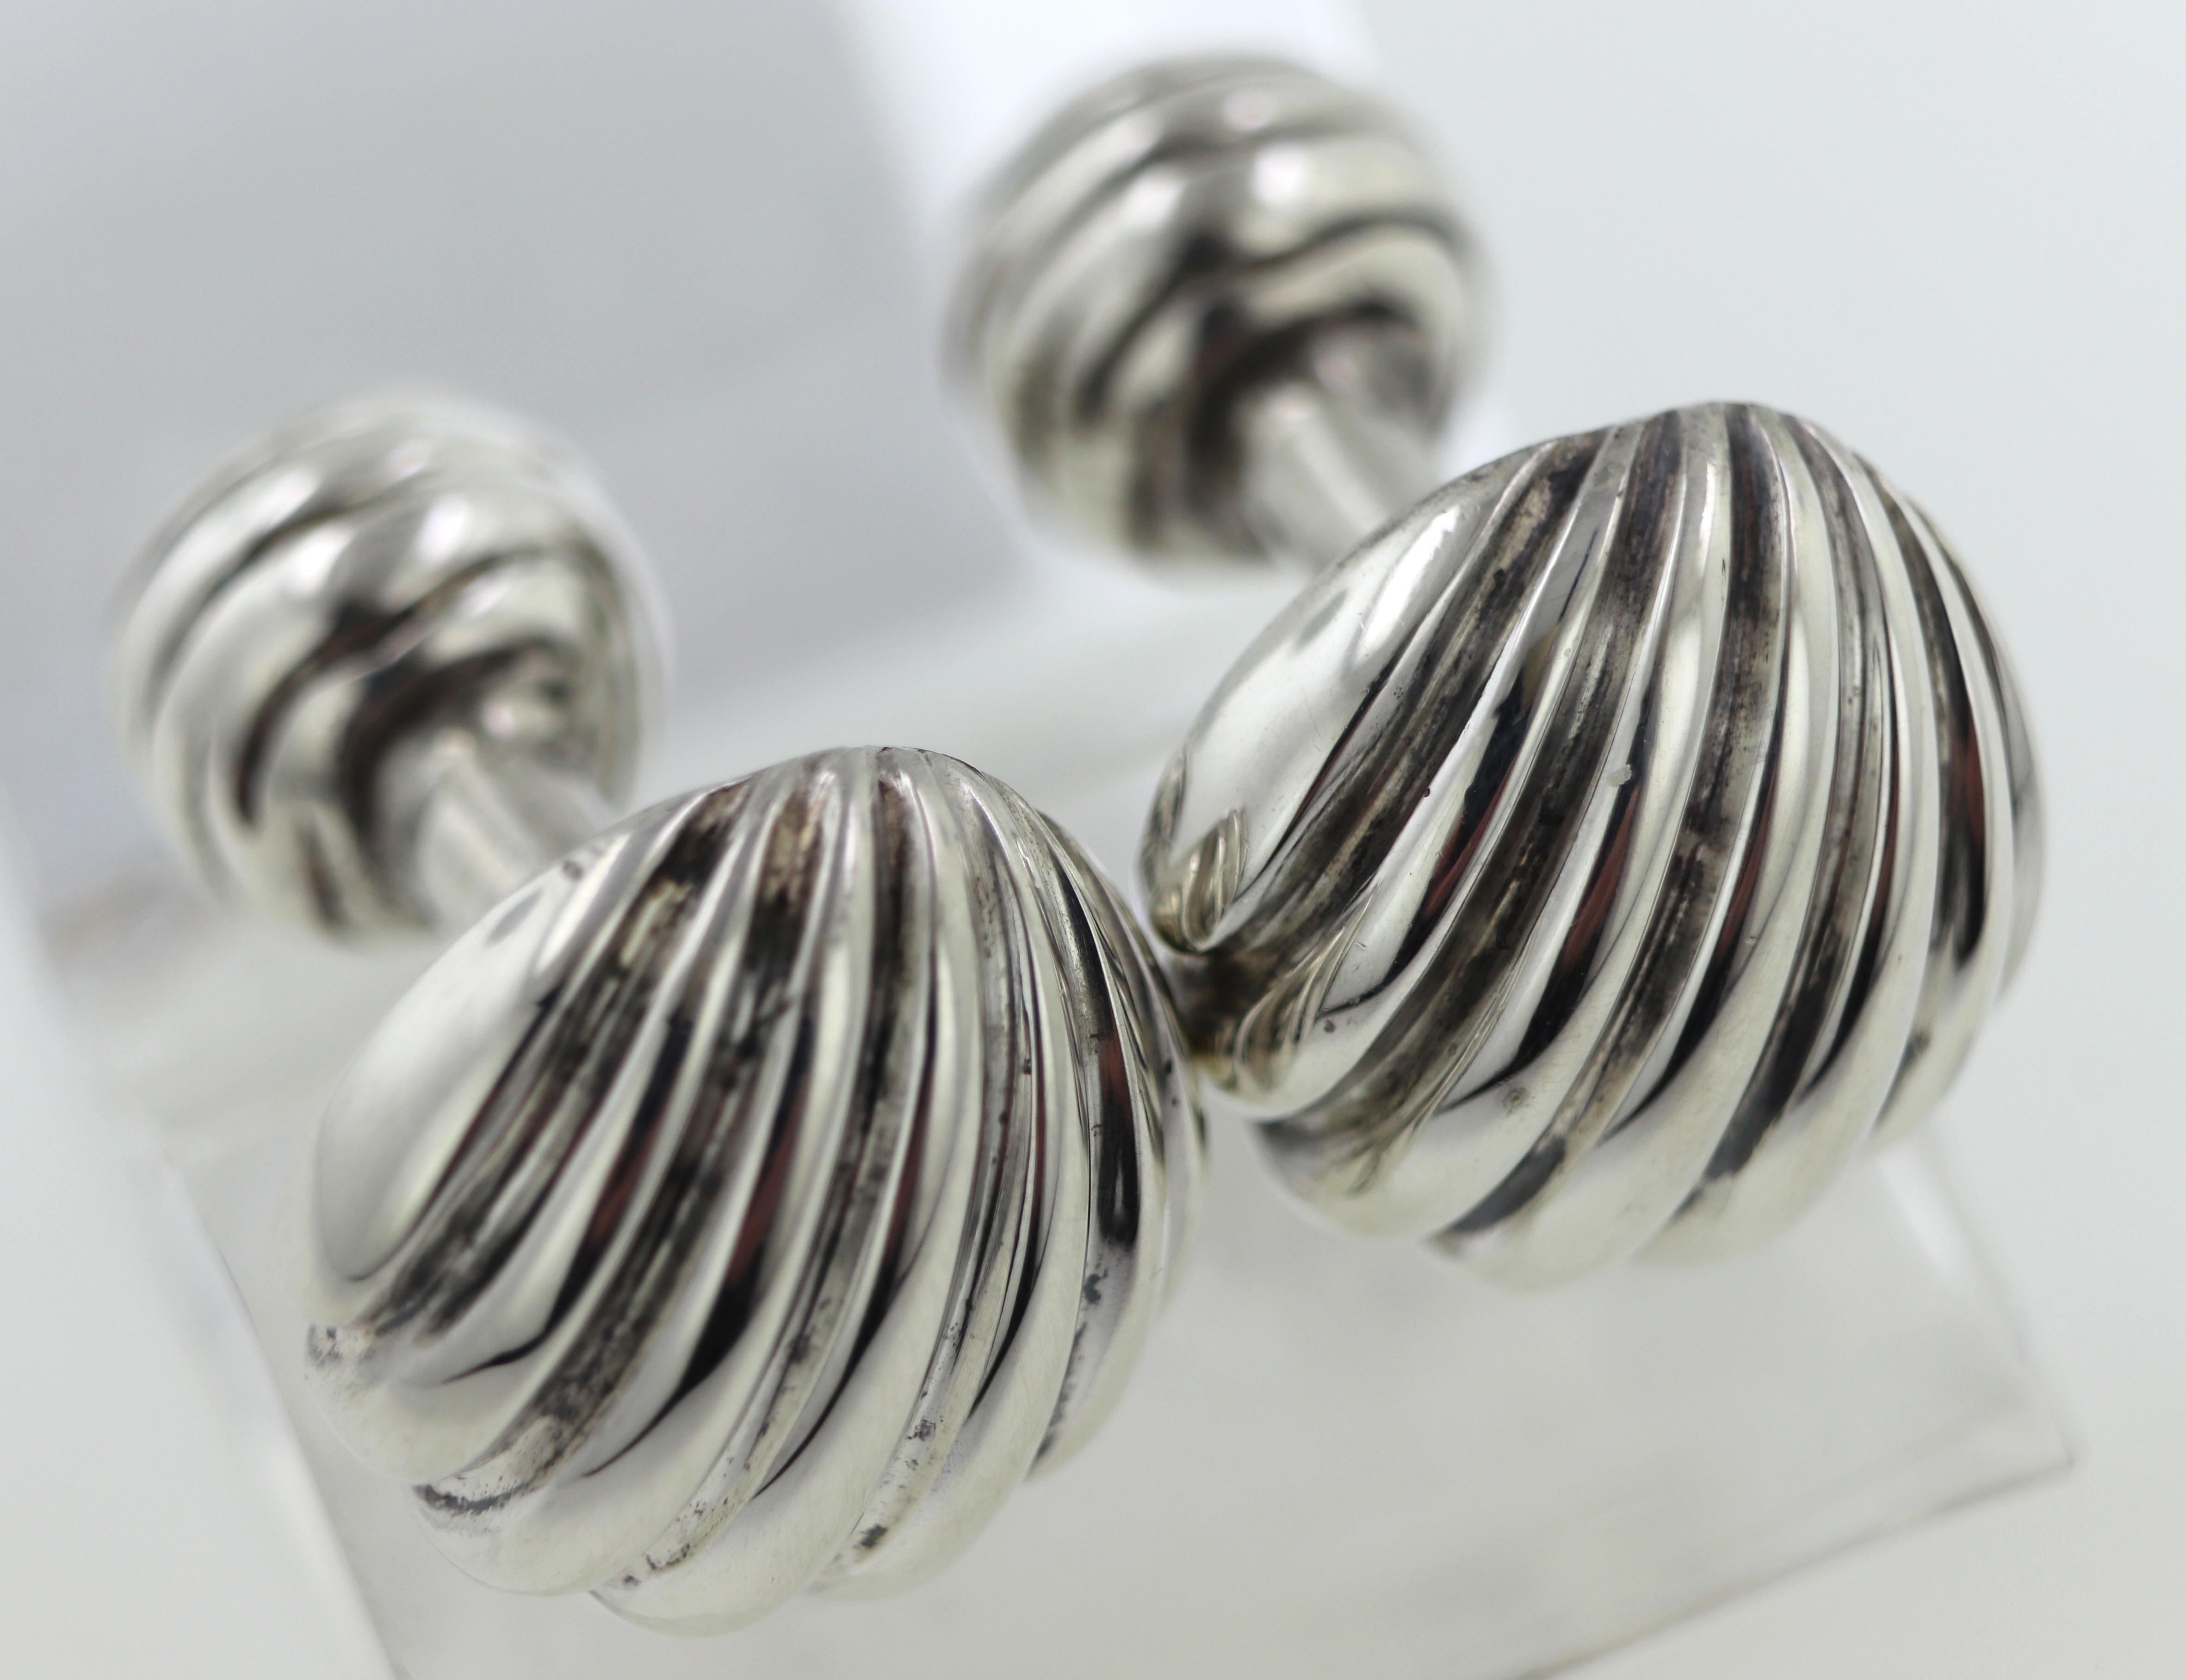 The pair of sterling silver barbell style cufflinks are in the shape of shells, 15.7 X 16.1 mm, 9.5 mm ball,
26.2 mm length, Total weight 19.81 grams.